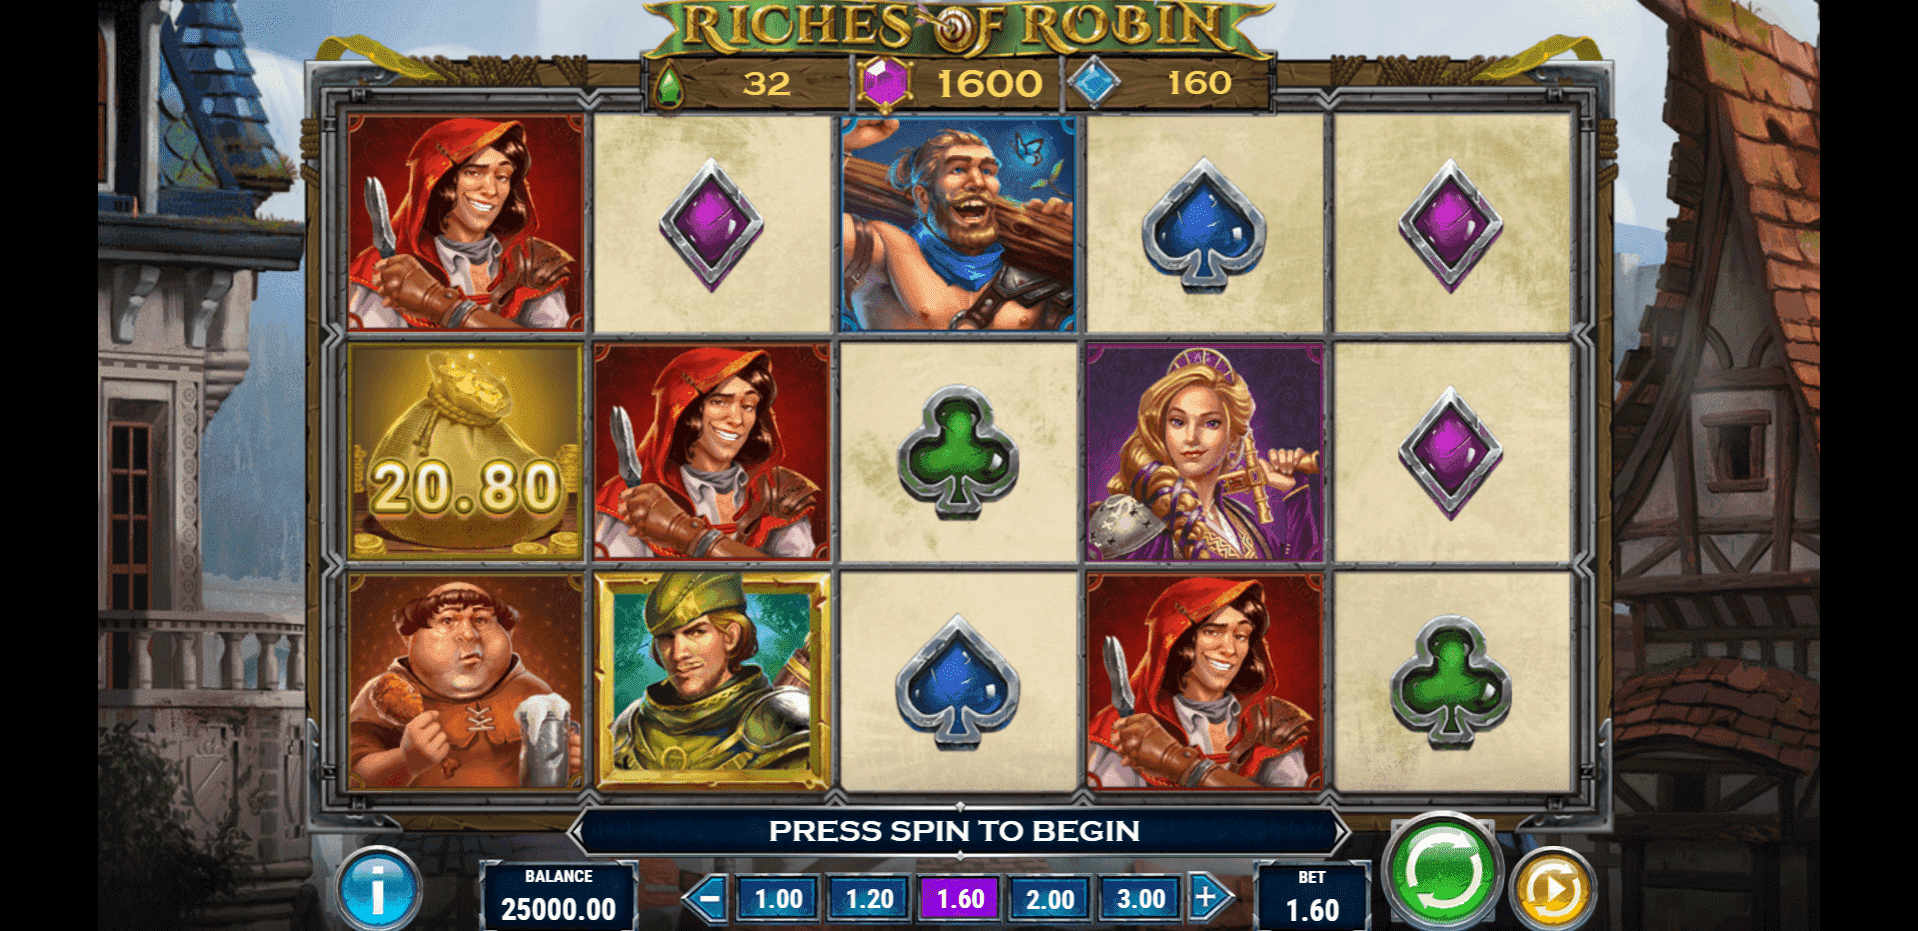 Riches of Robin slot play free